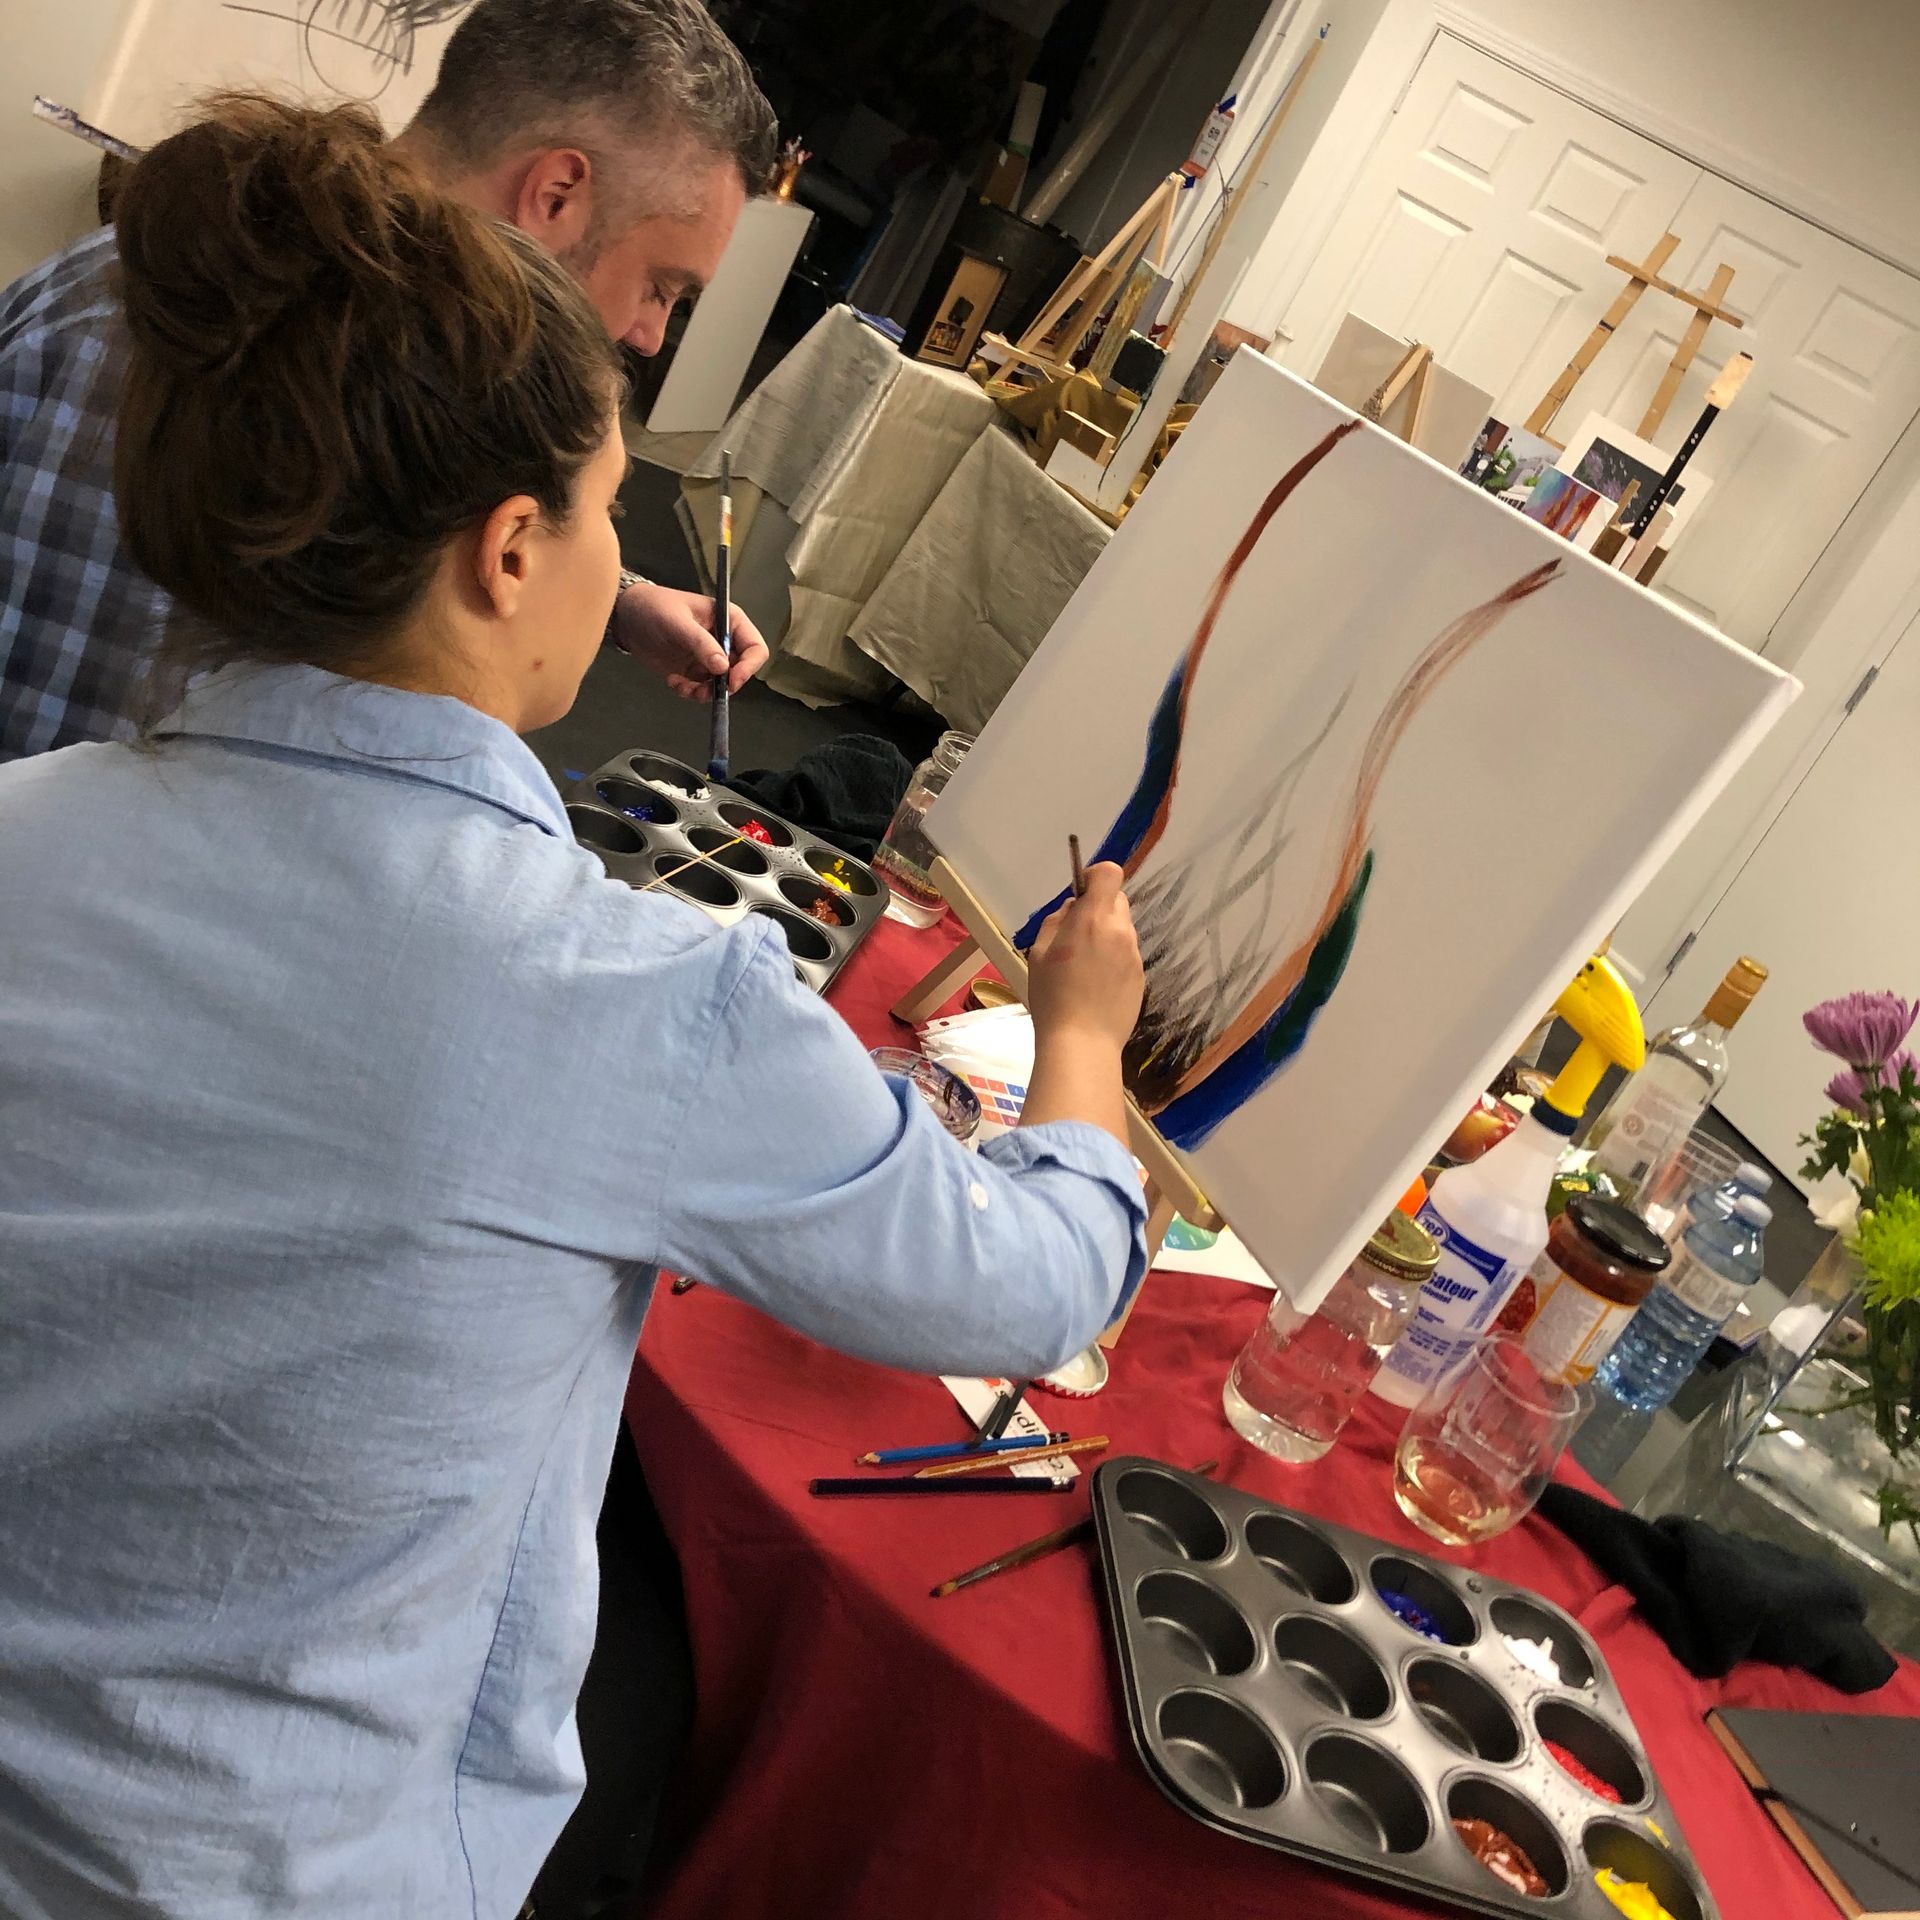 Datenight event showing couple working on a painting together.